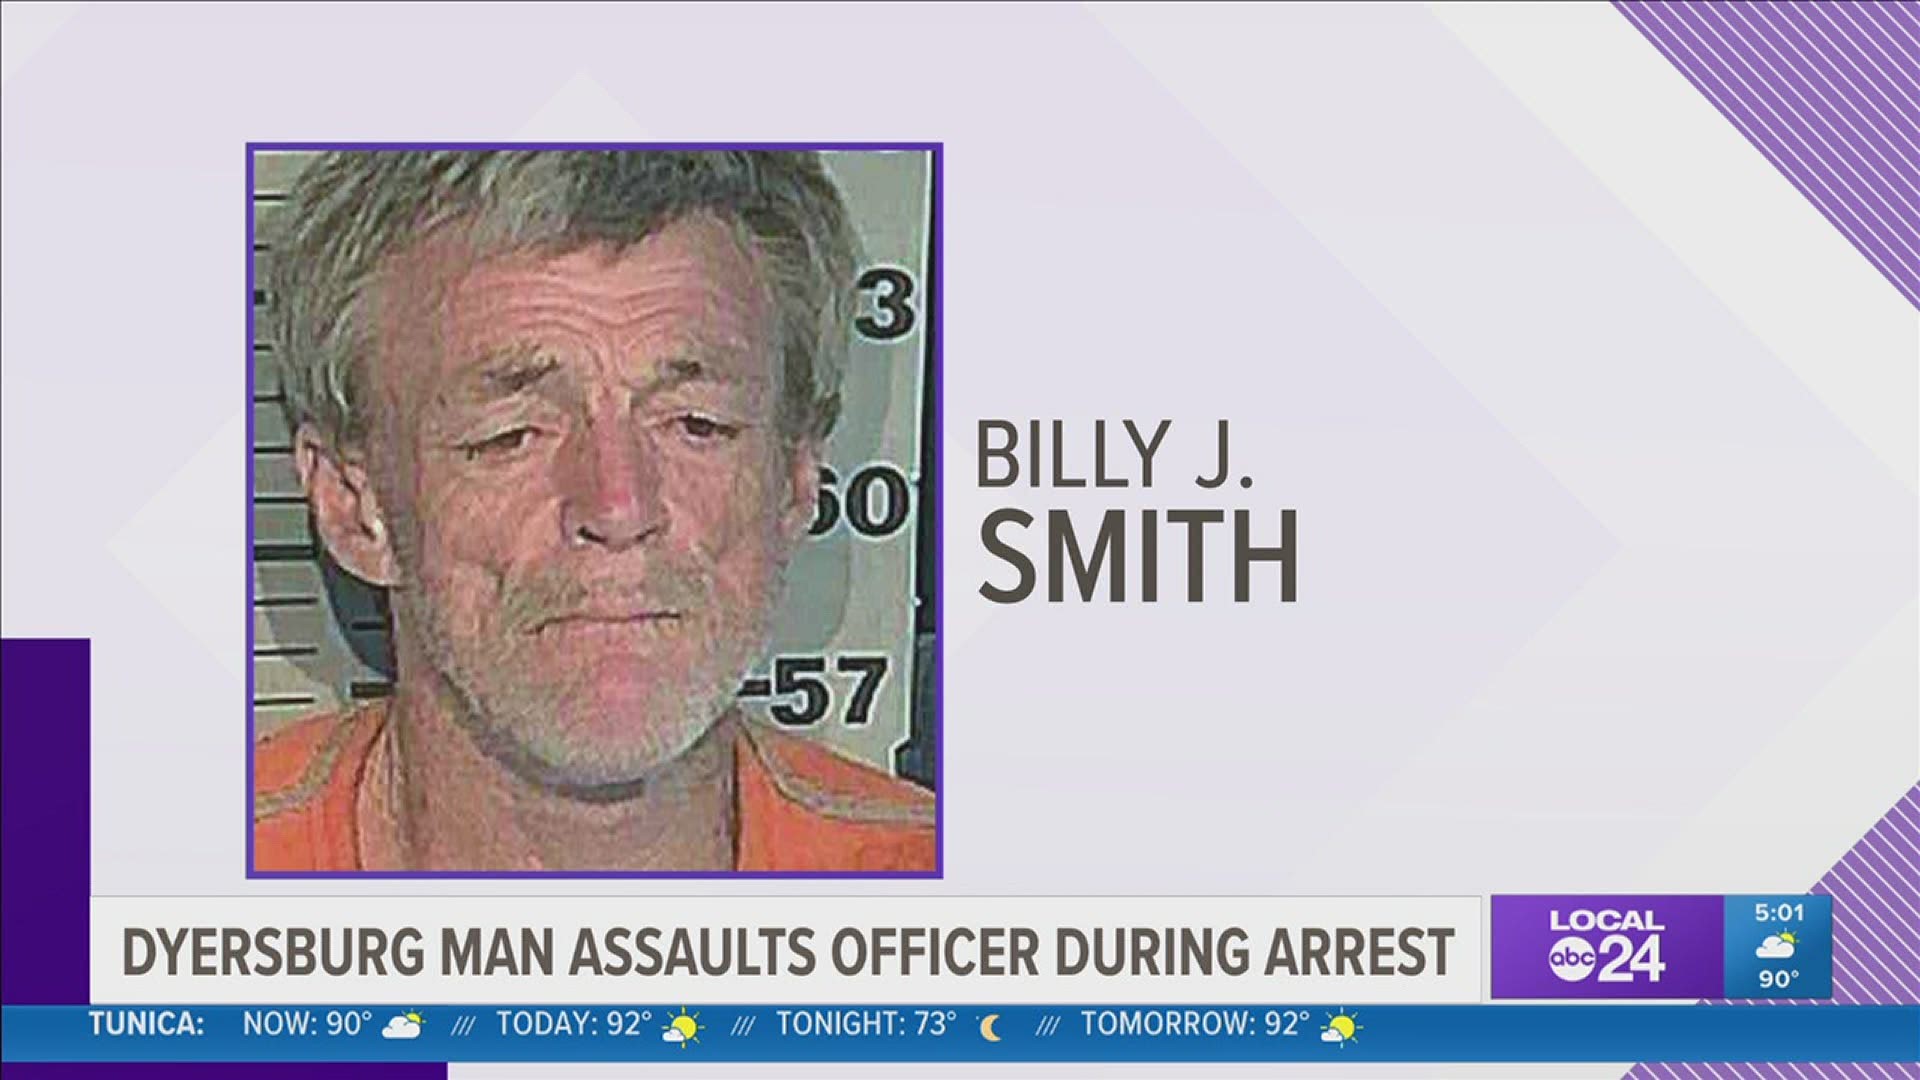 Police said it happened after officers responded to a report that Billy J. Smith had tried to hit a manager at the Motel 6 on Lake Road with a pipe.